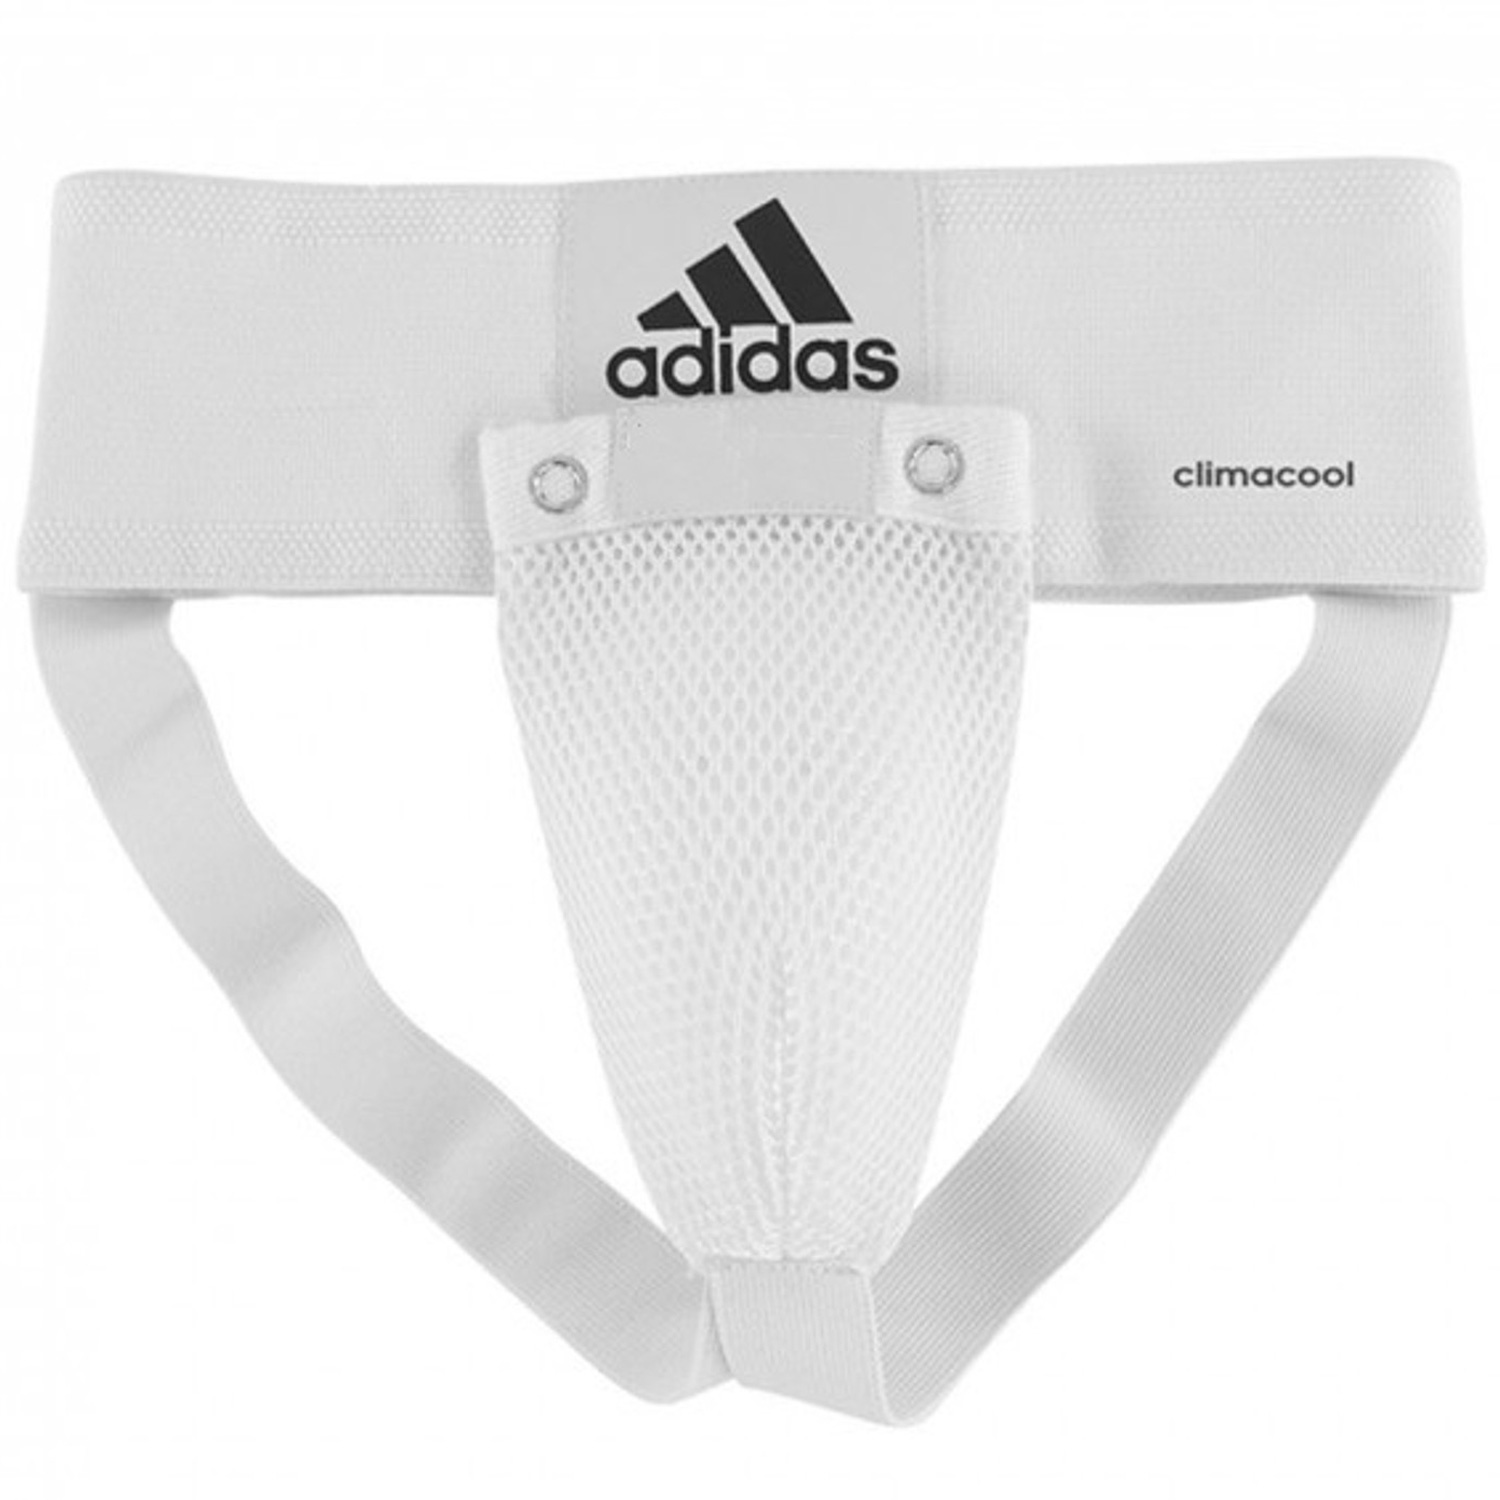 adidas Cup Supporters, white, XL